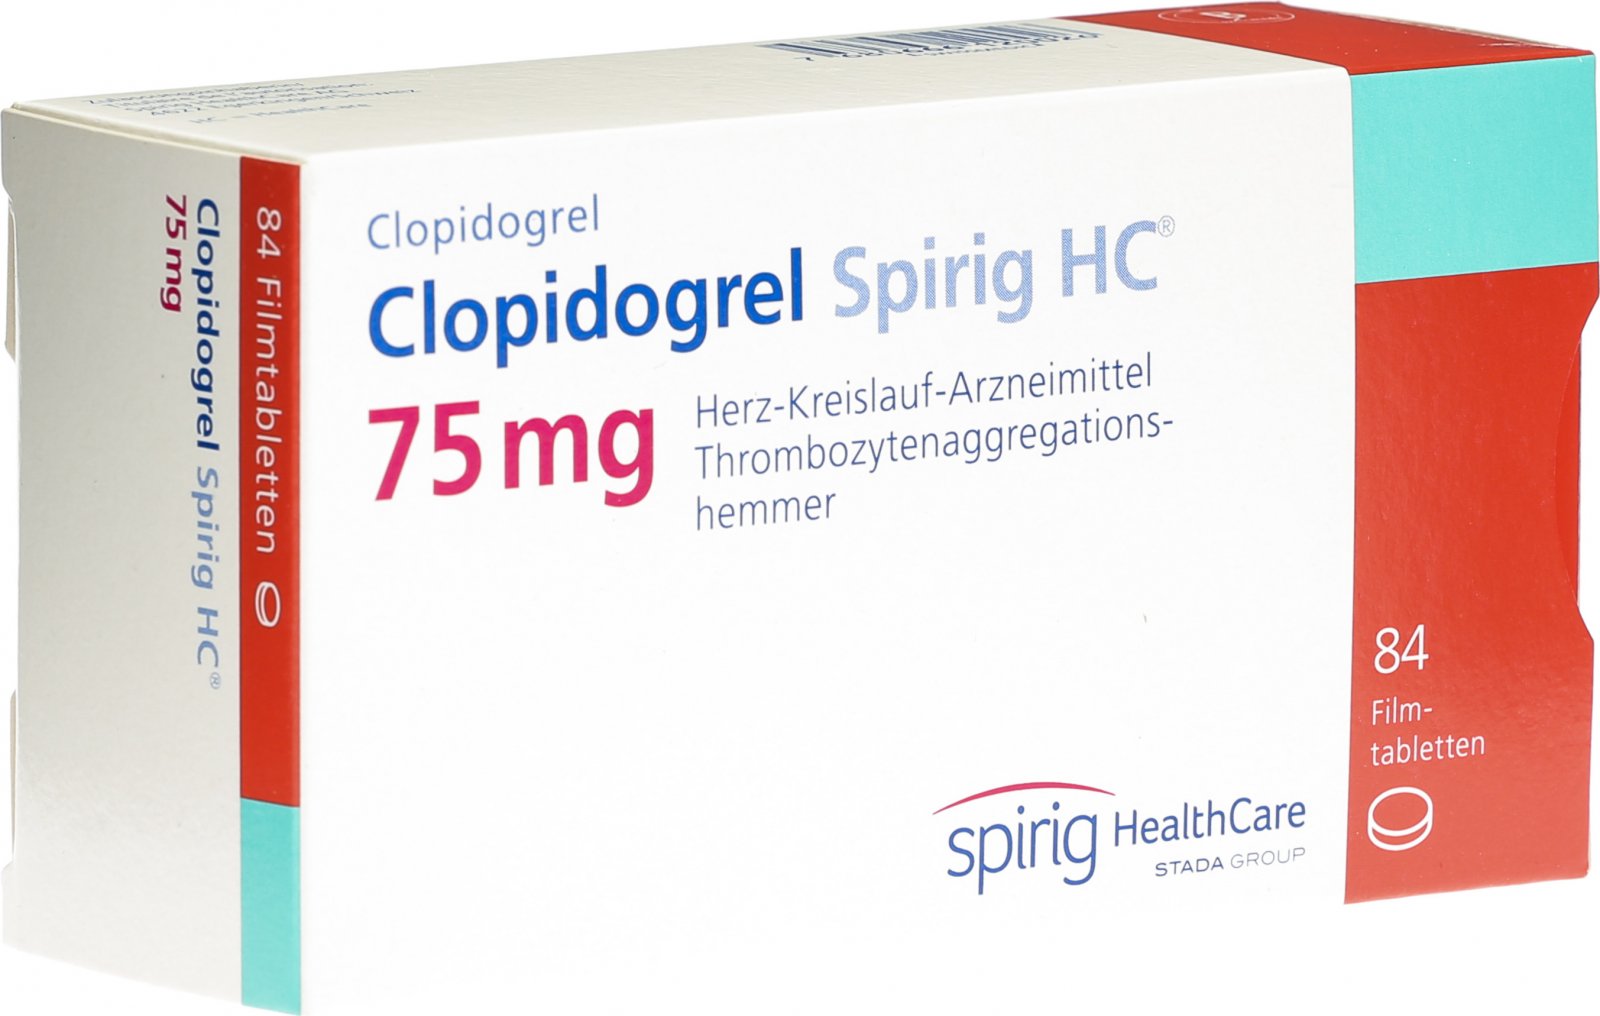 clopidogrel used for chf